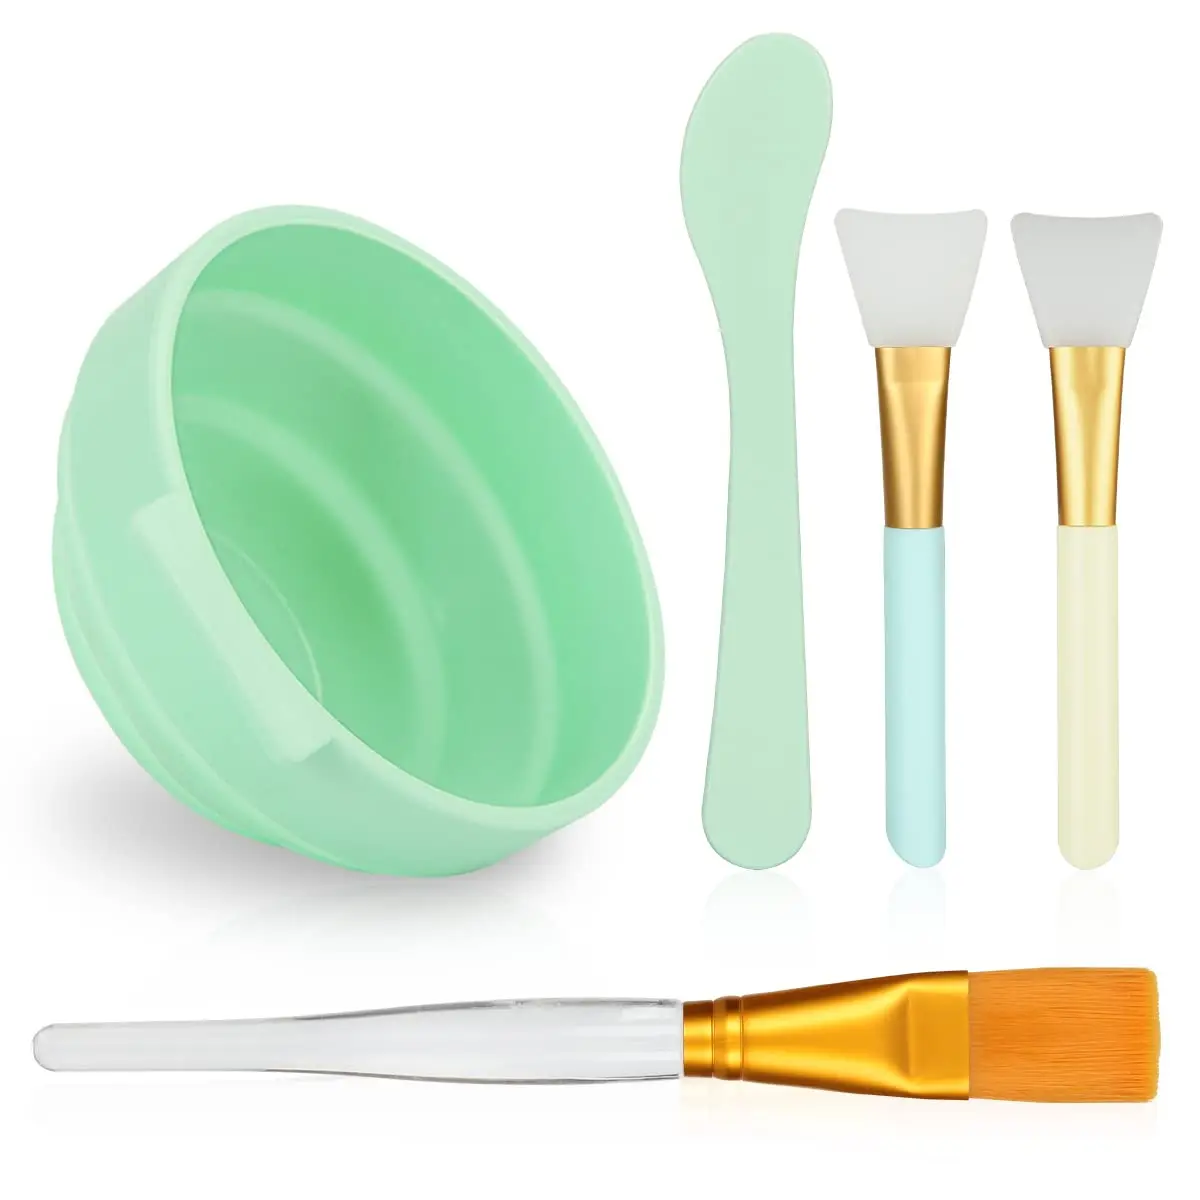 

5 in 1 DIY Face Mask Mixing Tool Kit with Bowl Stick Spatula Silicone Face Mask Brush Makeup Brushes Face Mask Mixing Bowl Set